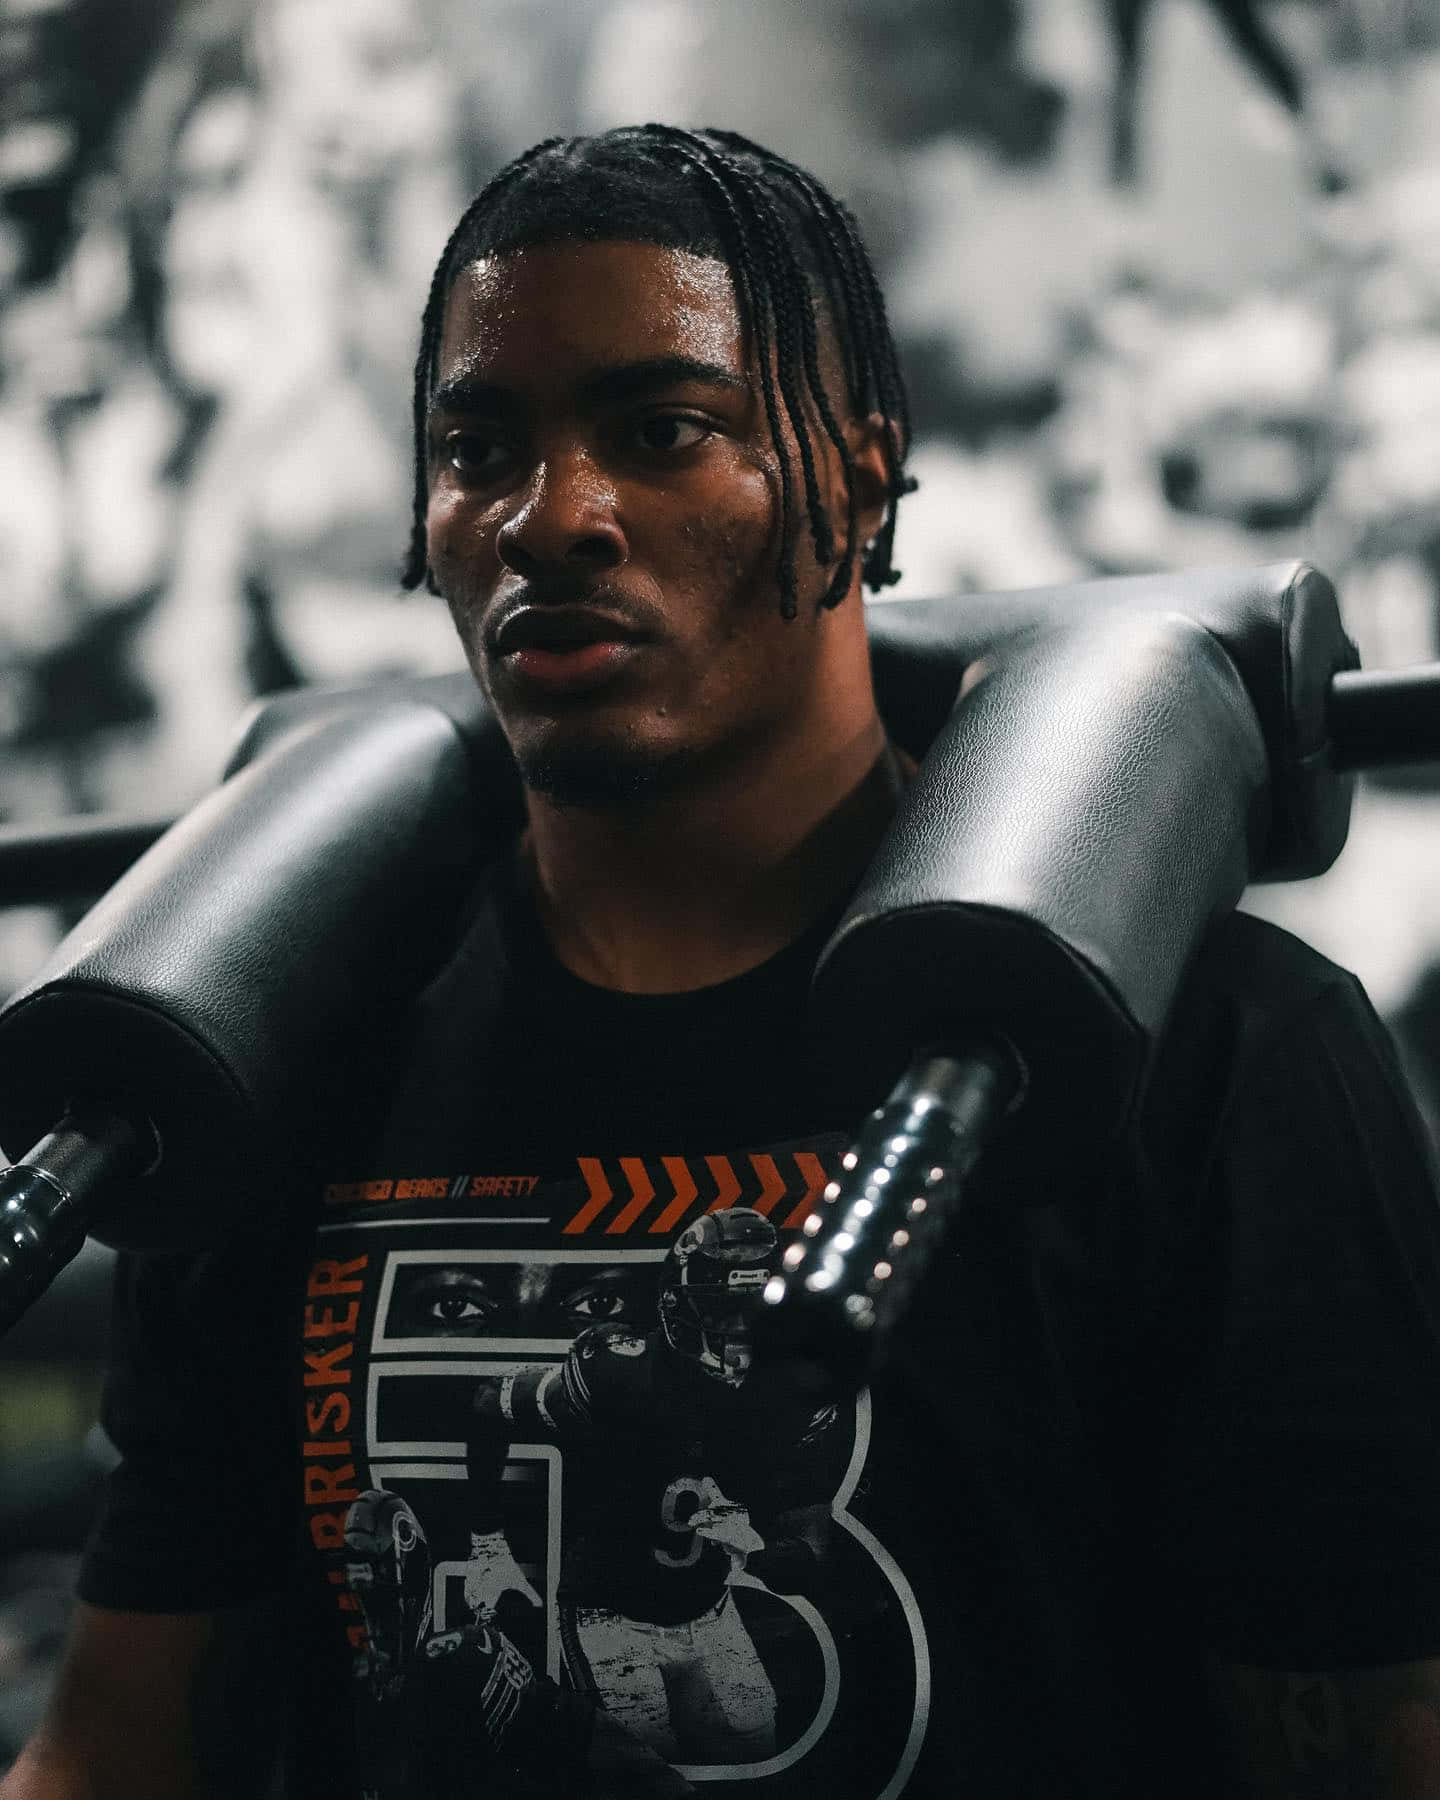 Focused Athlete During Workout Wallpaper